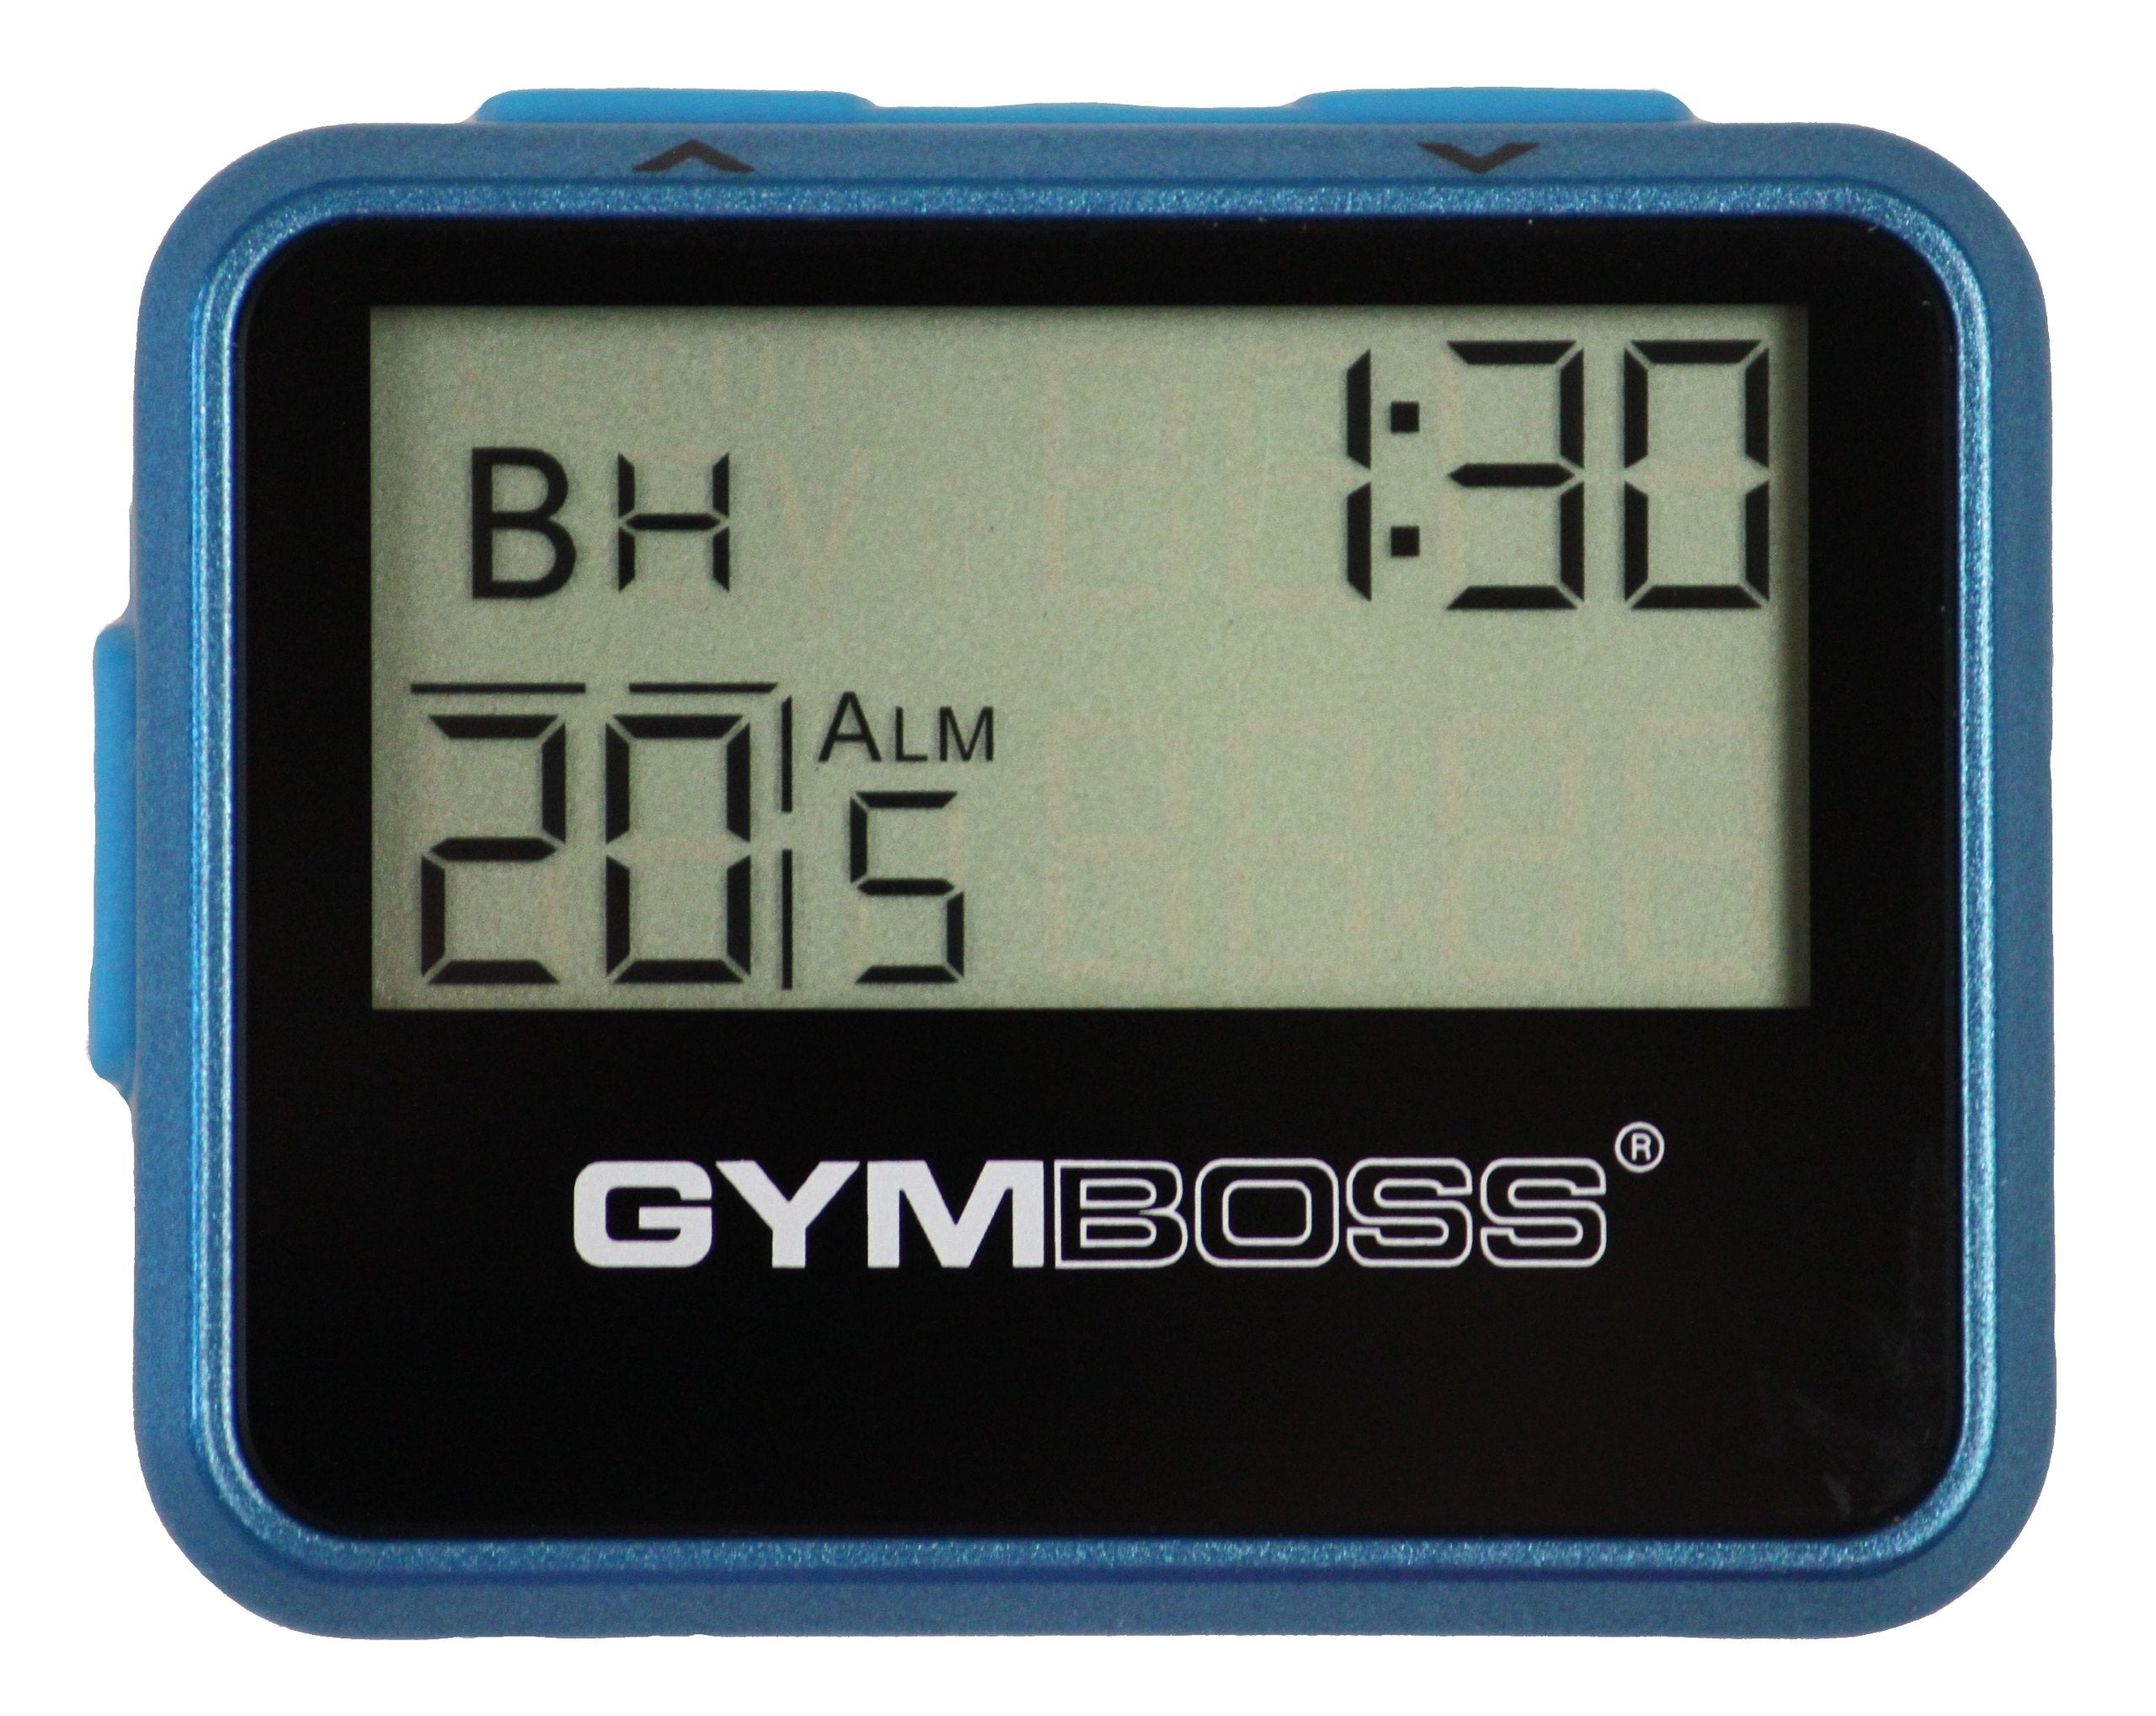 Gymboss Interval Timer and Stopwatch - TEAL/BLUE METALLIC GLOSS